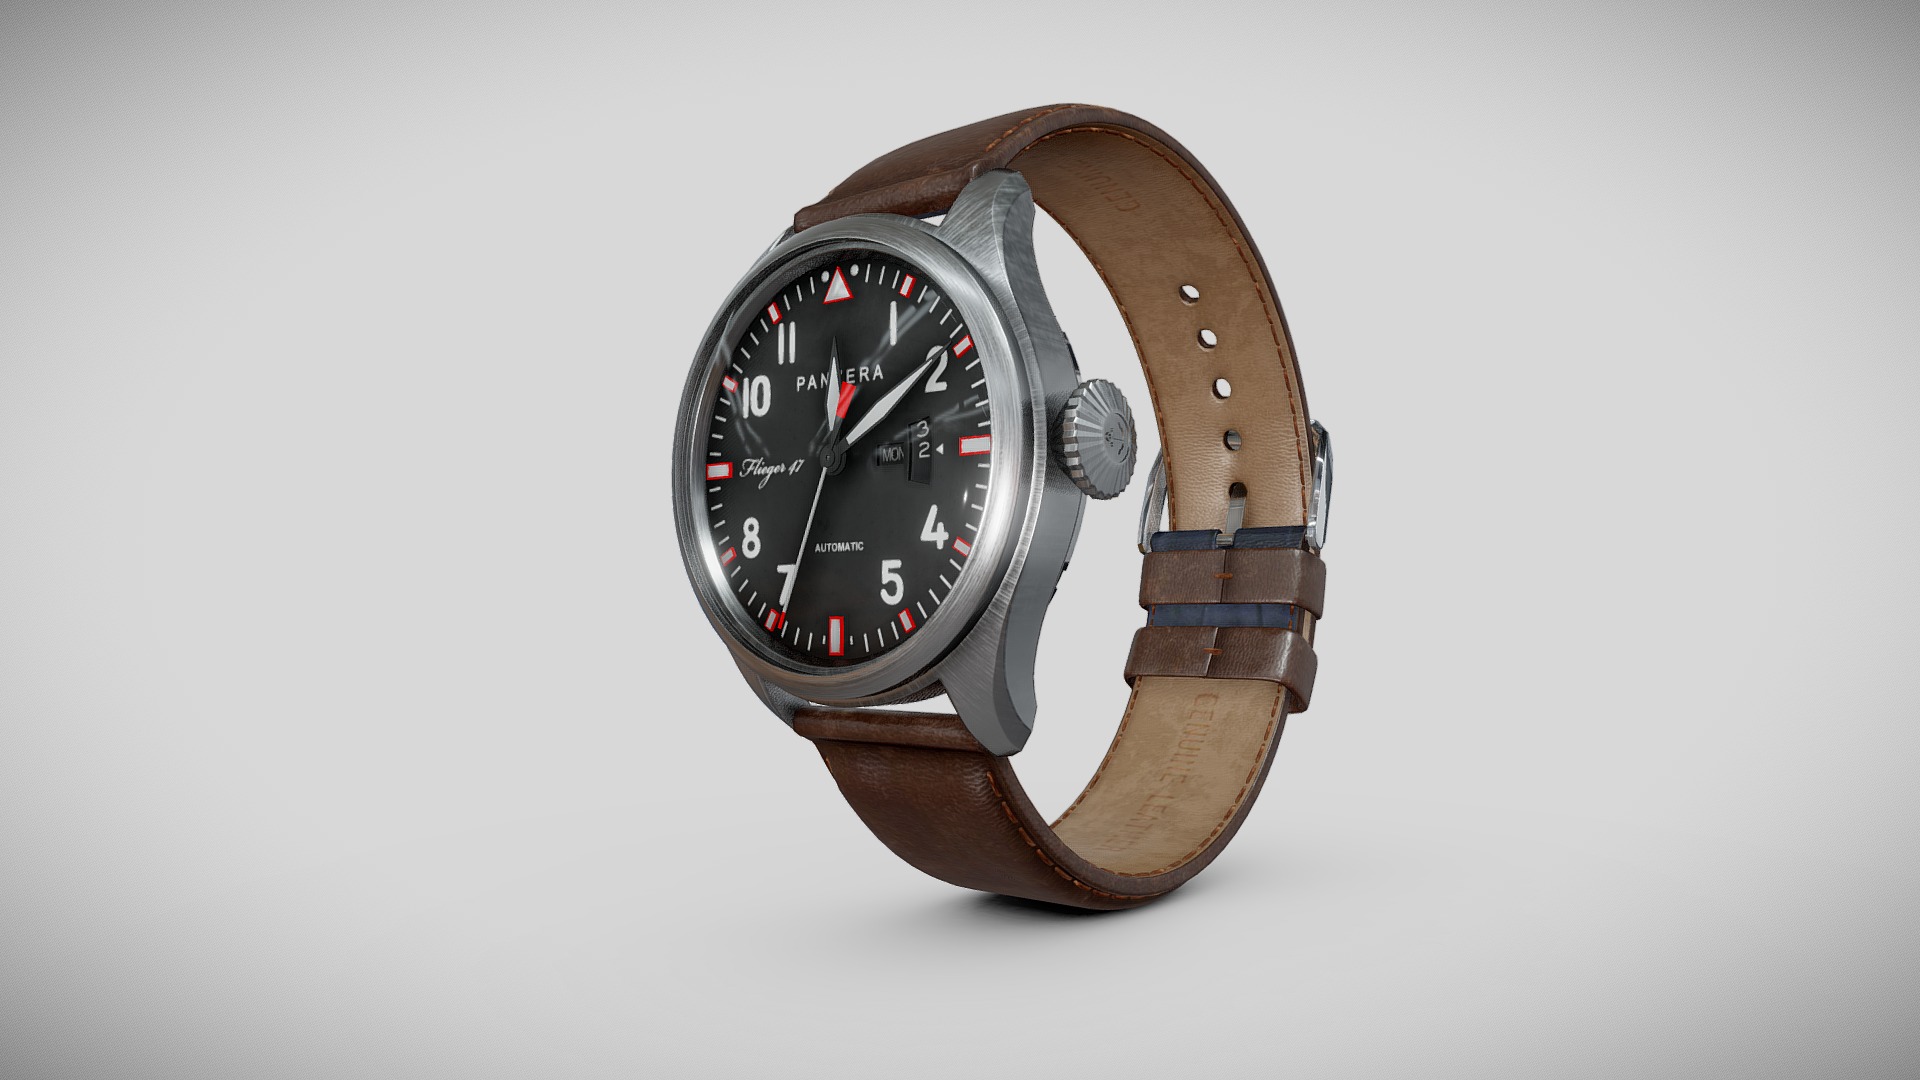 3D model Panzera Flieger 47 Watch - This is a 3D model of the Panzera Flieger 47 Watch. The 3D model is about a watch with a leather strap.